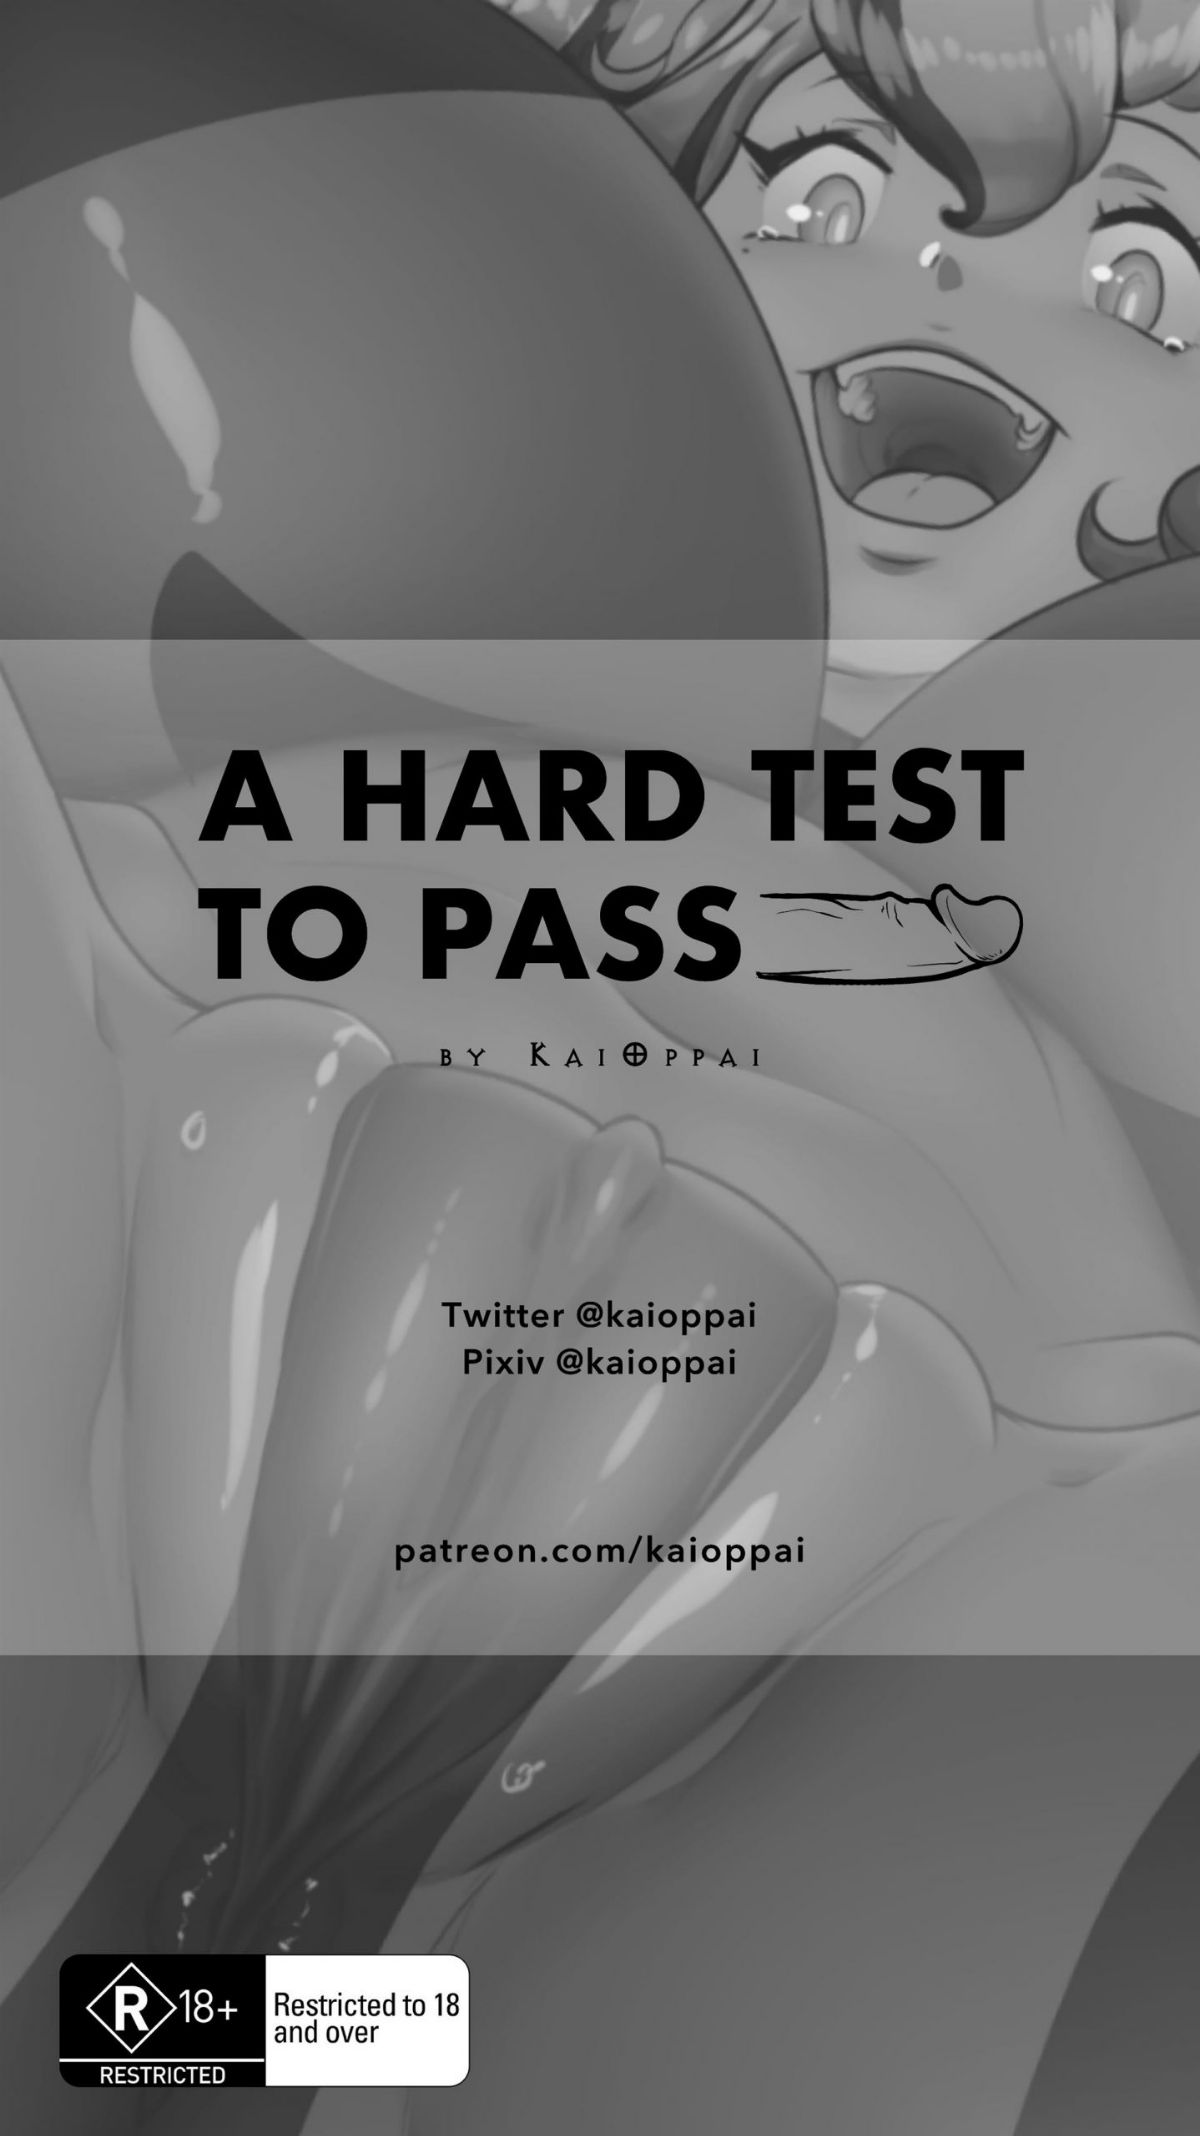 A Hard Test to Pass Hentai pt-br 02